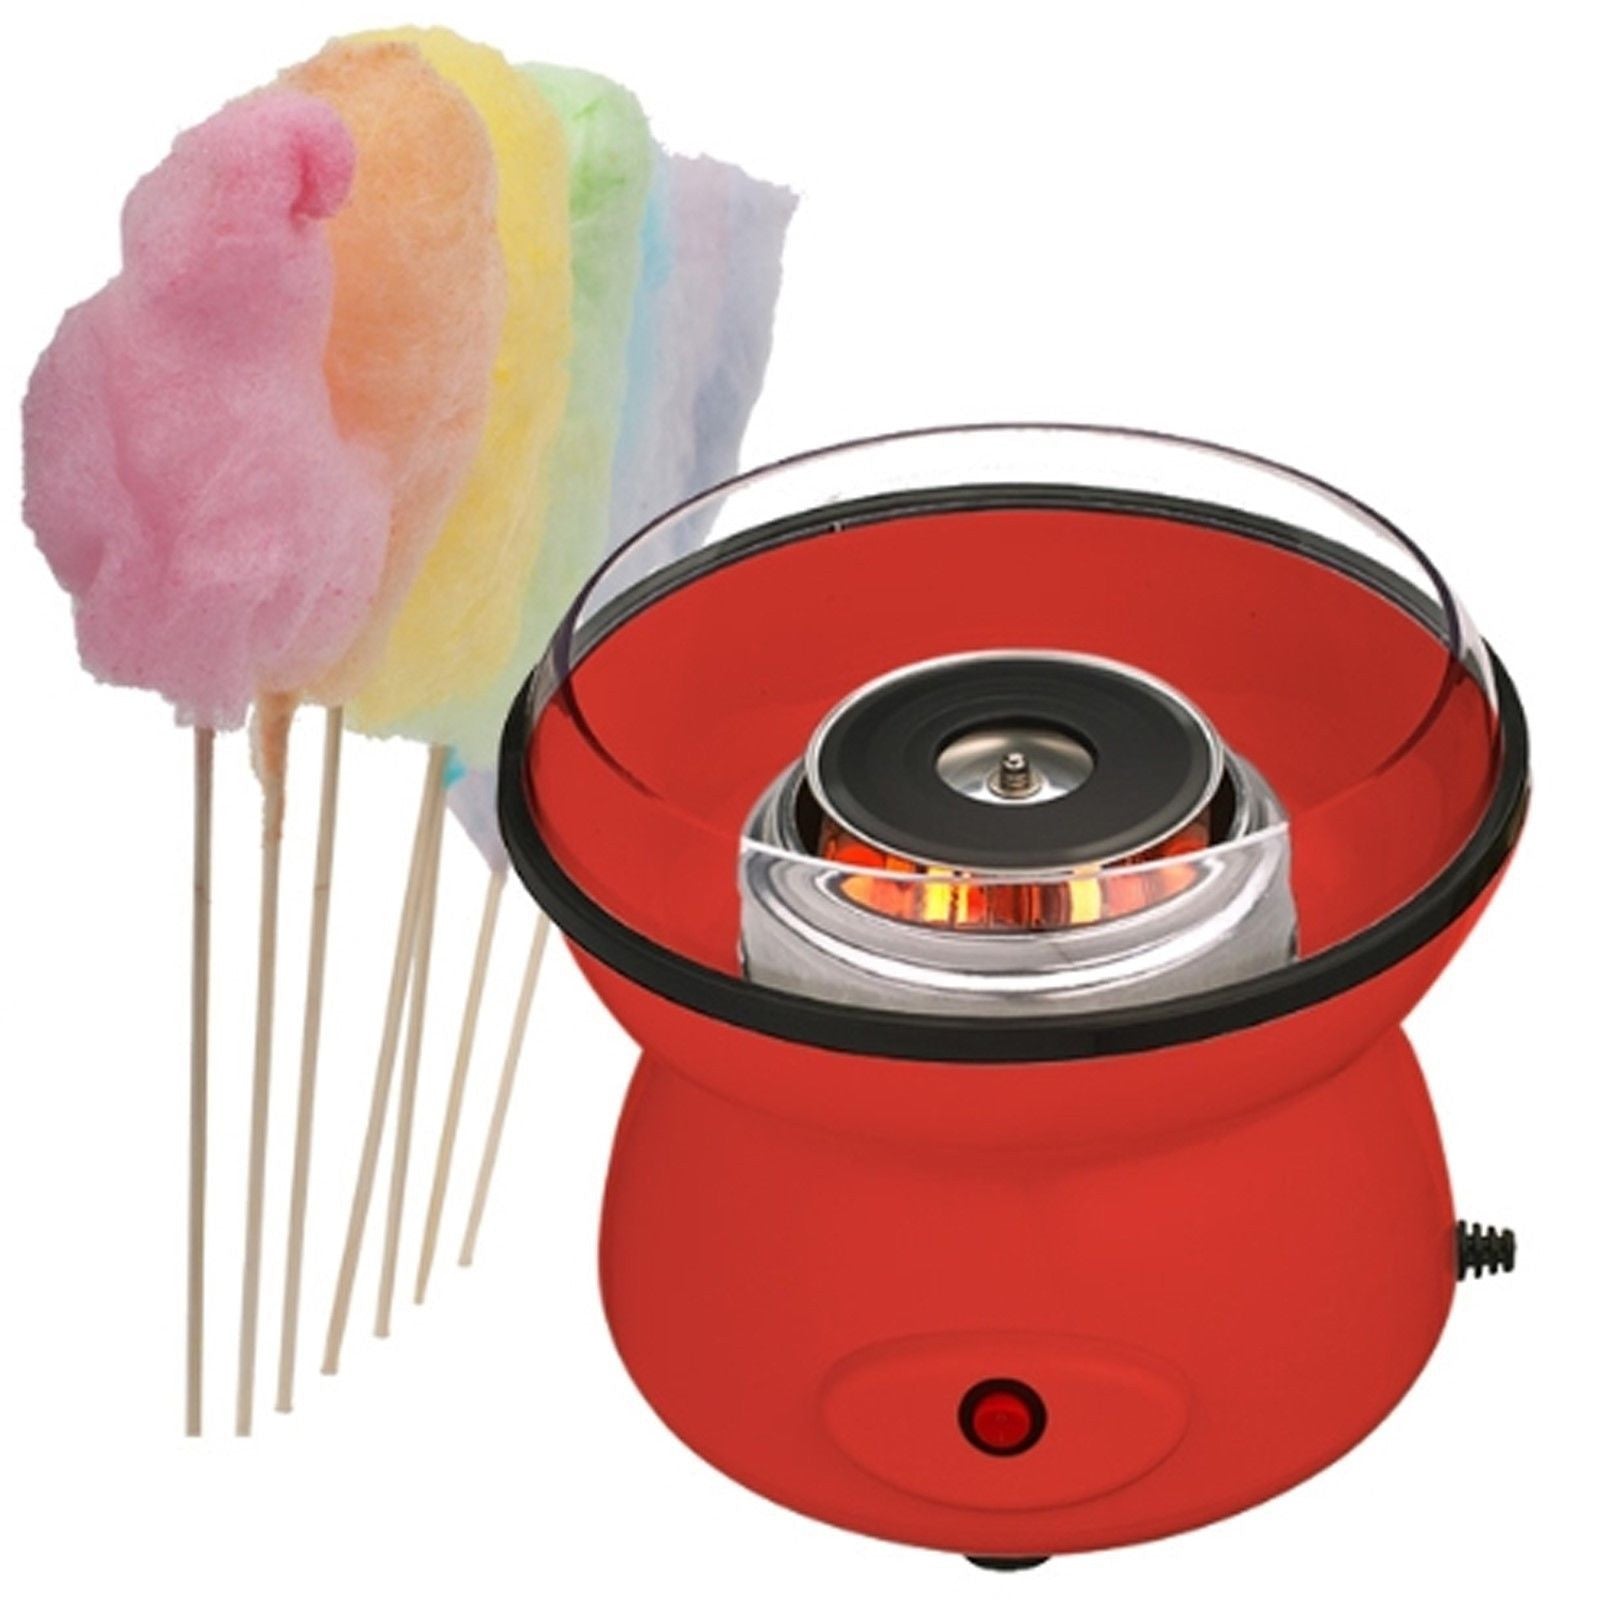 ELECTRIC CANDYFLOSS MAKING MACHINE HOME COTTON SUGAR CANDY FLOSS MAKER - RED